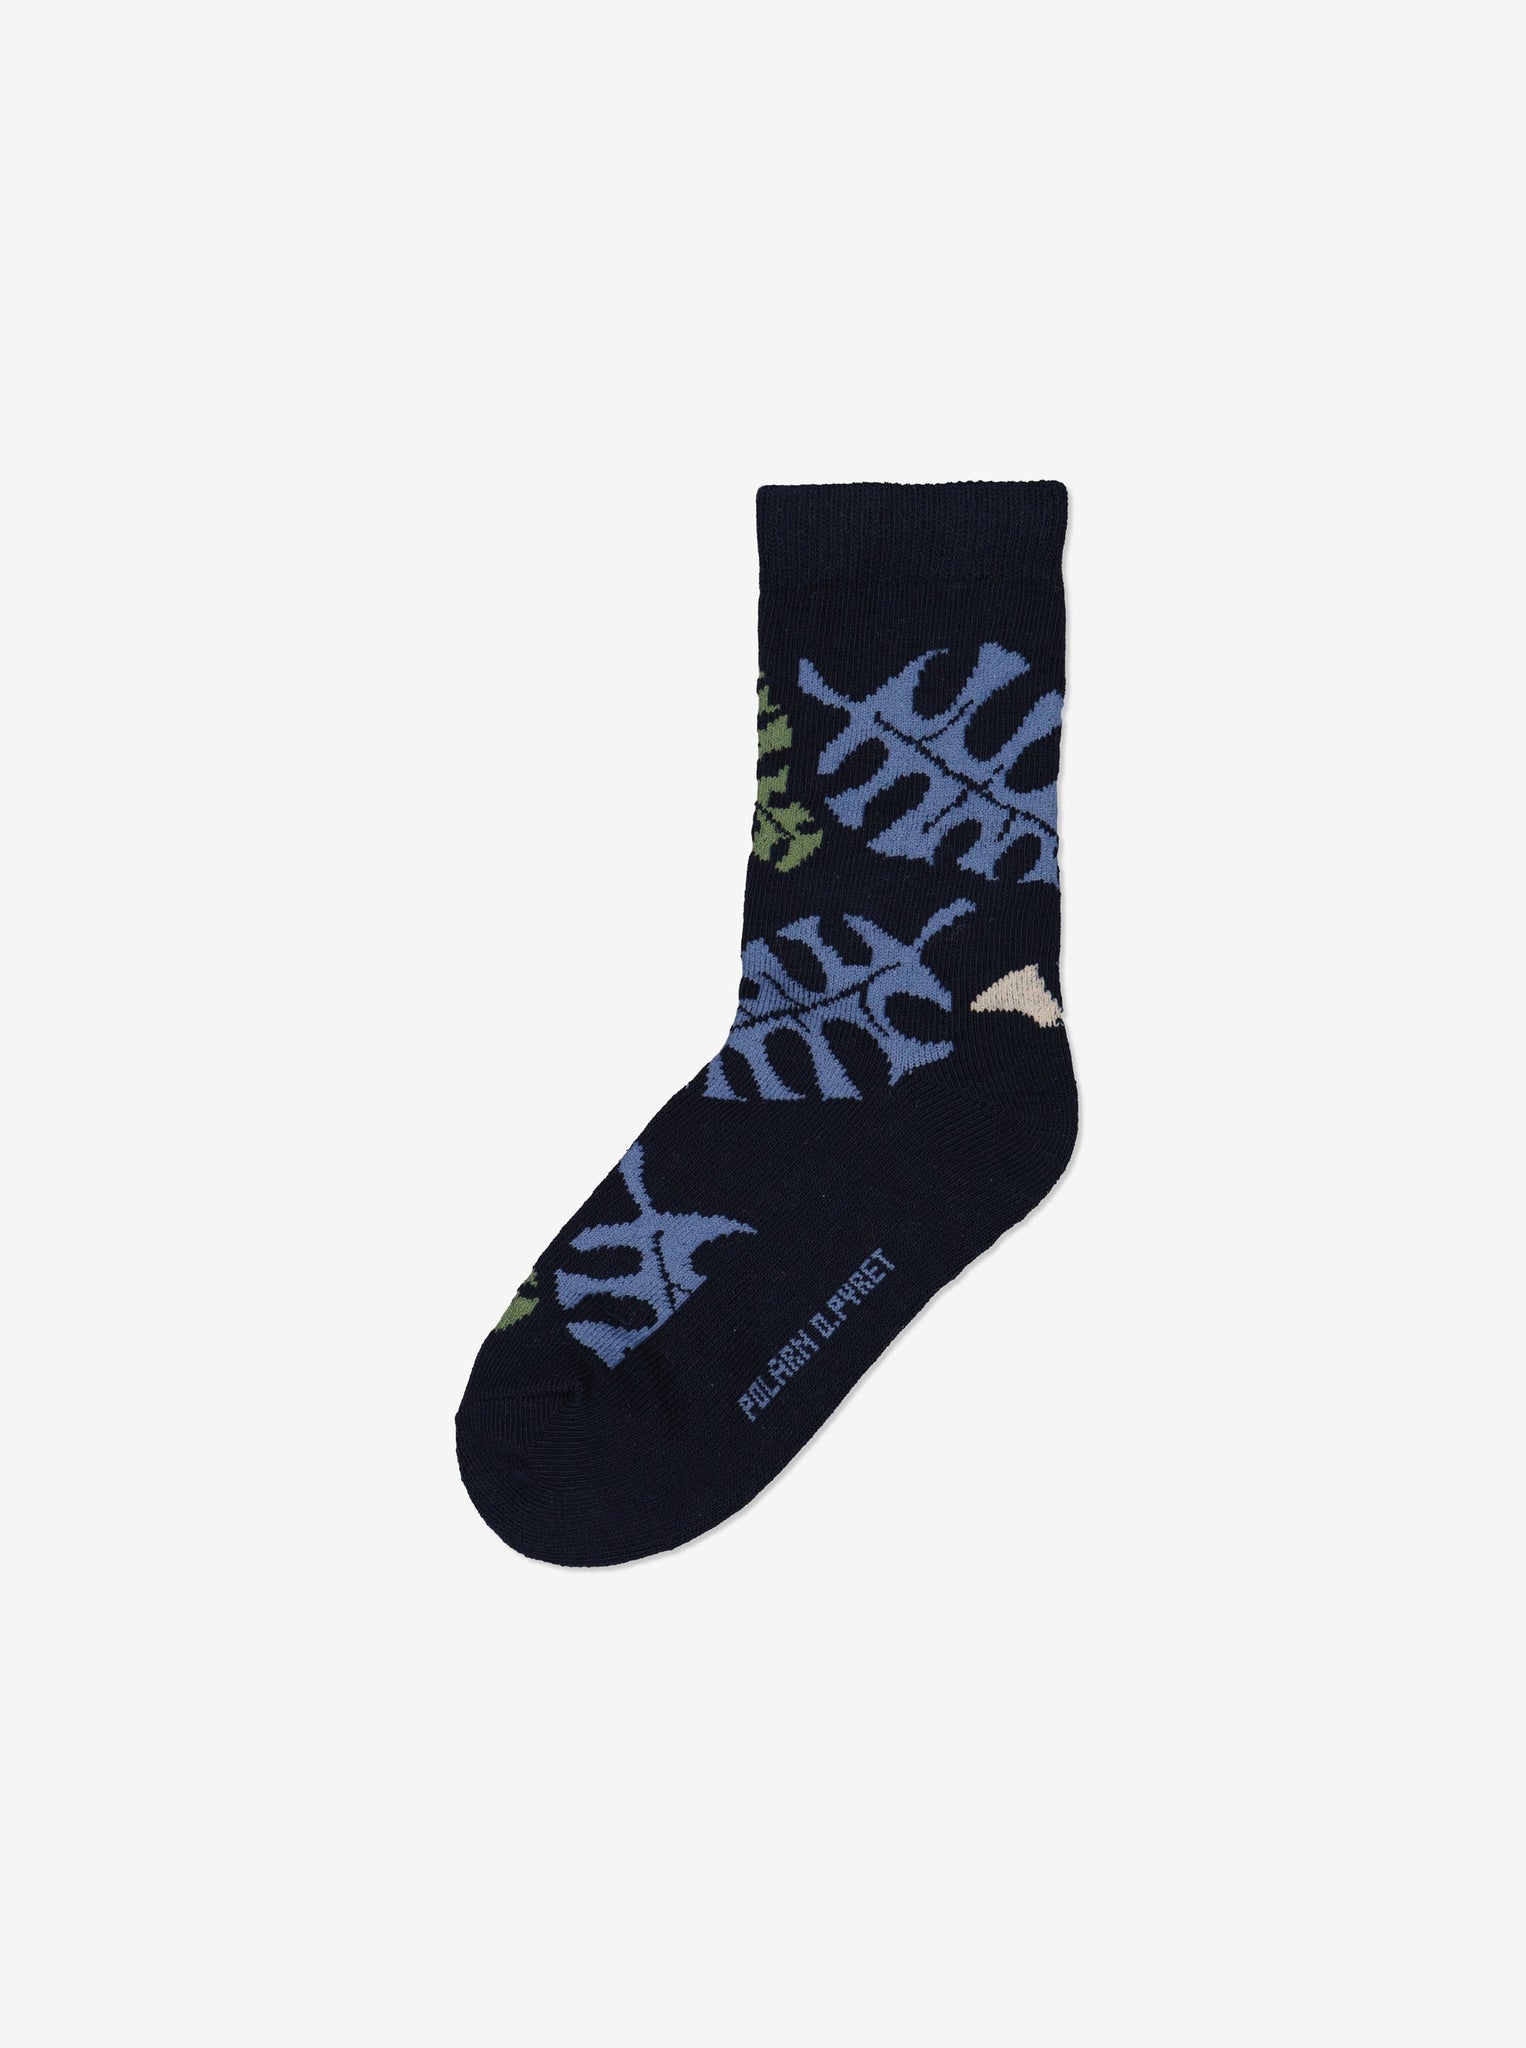  Navy Kids Socks Multipack from Polarn O. Pyret Kidswear. Made from sustainable materials.